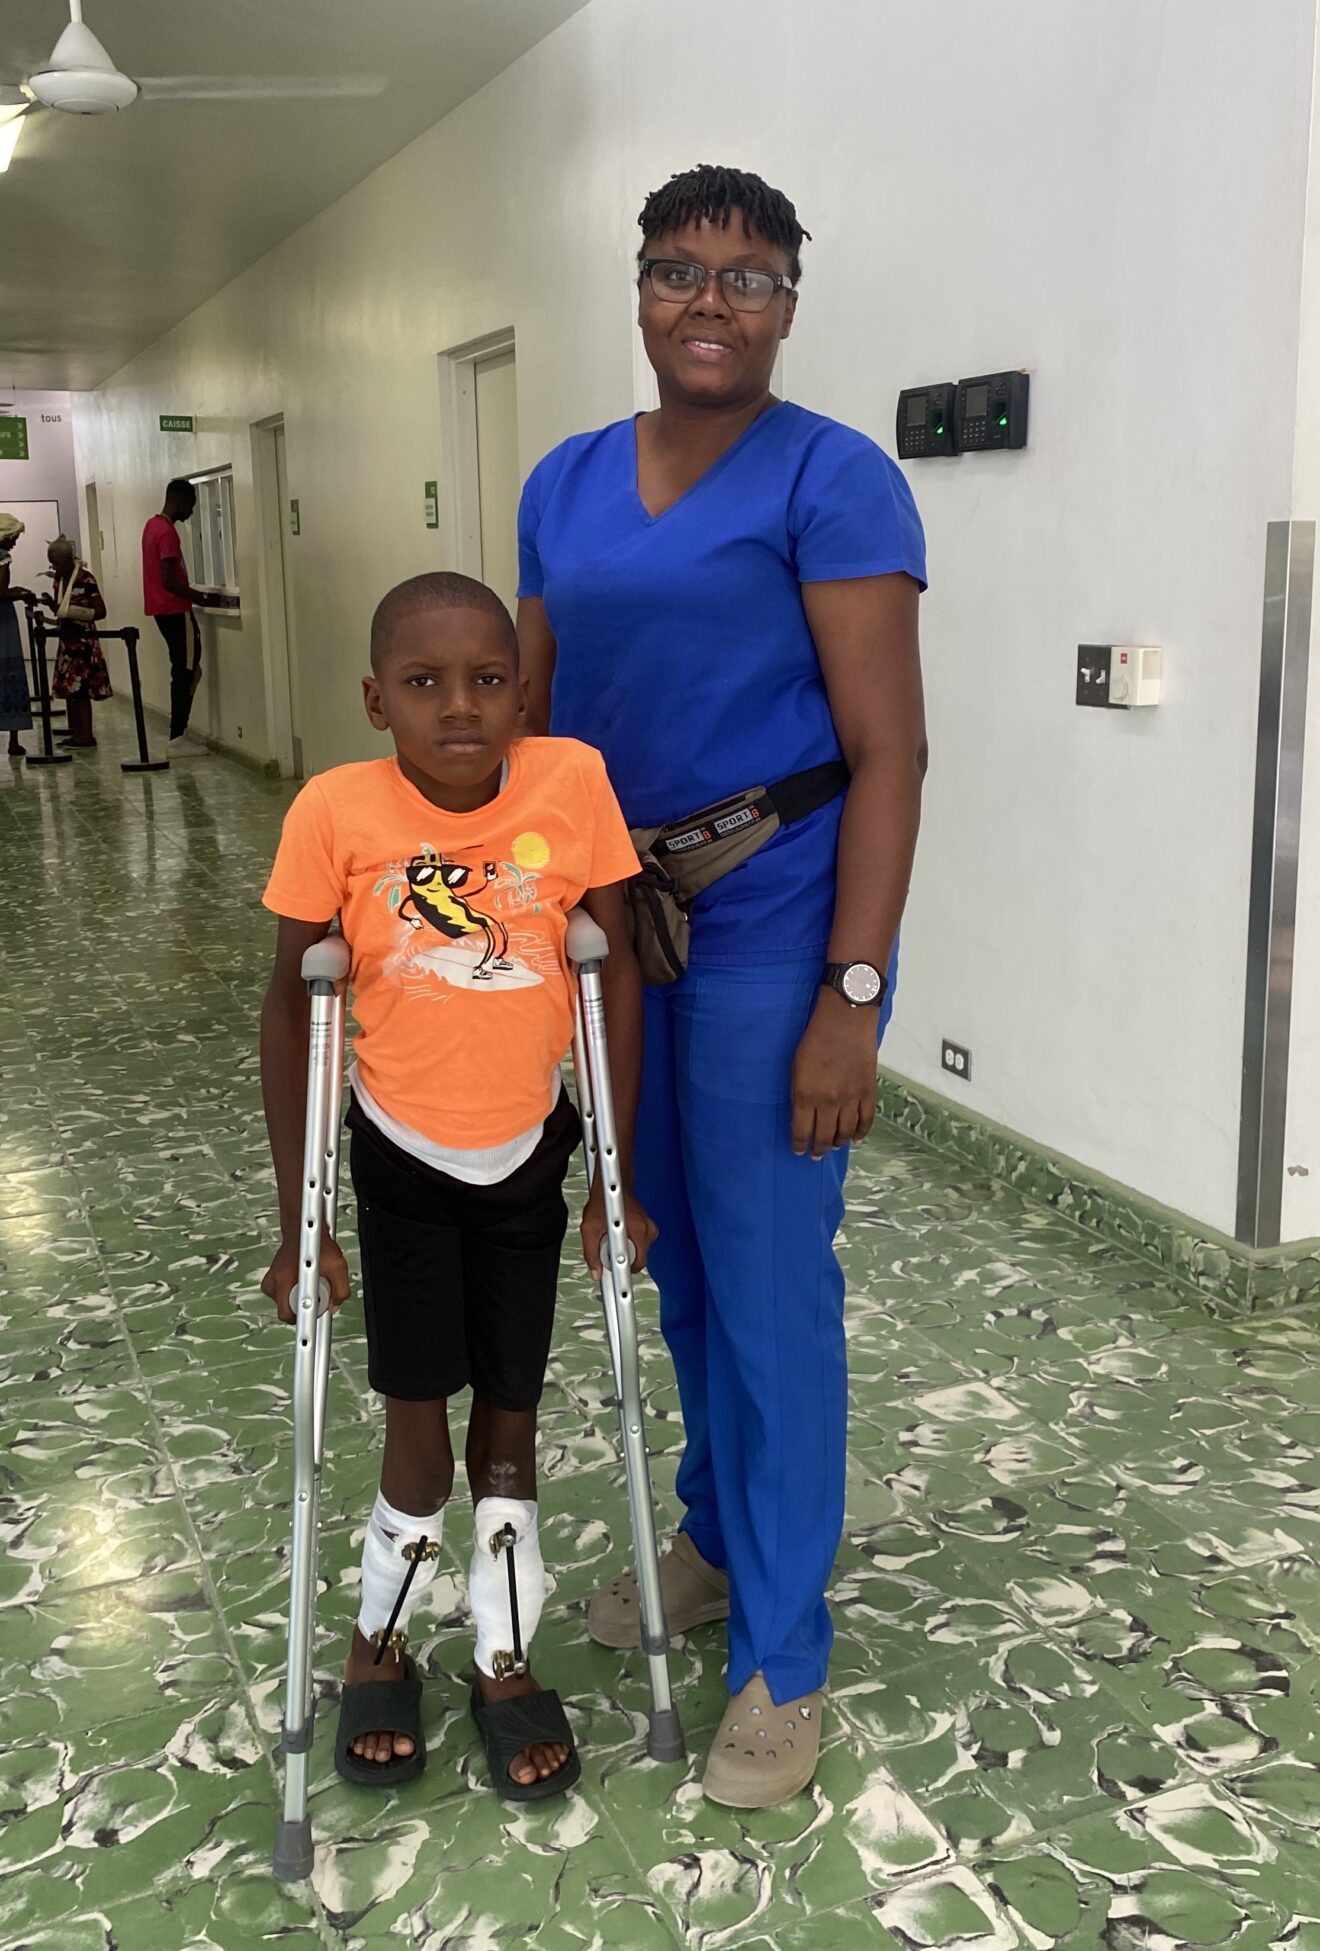 boy with braces on his legs and using crutches stands next to a physical therapist 